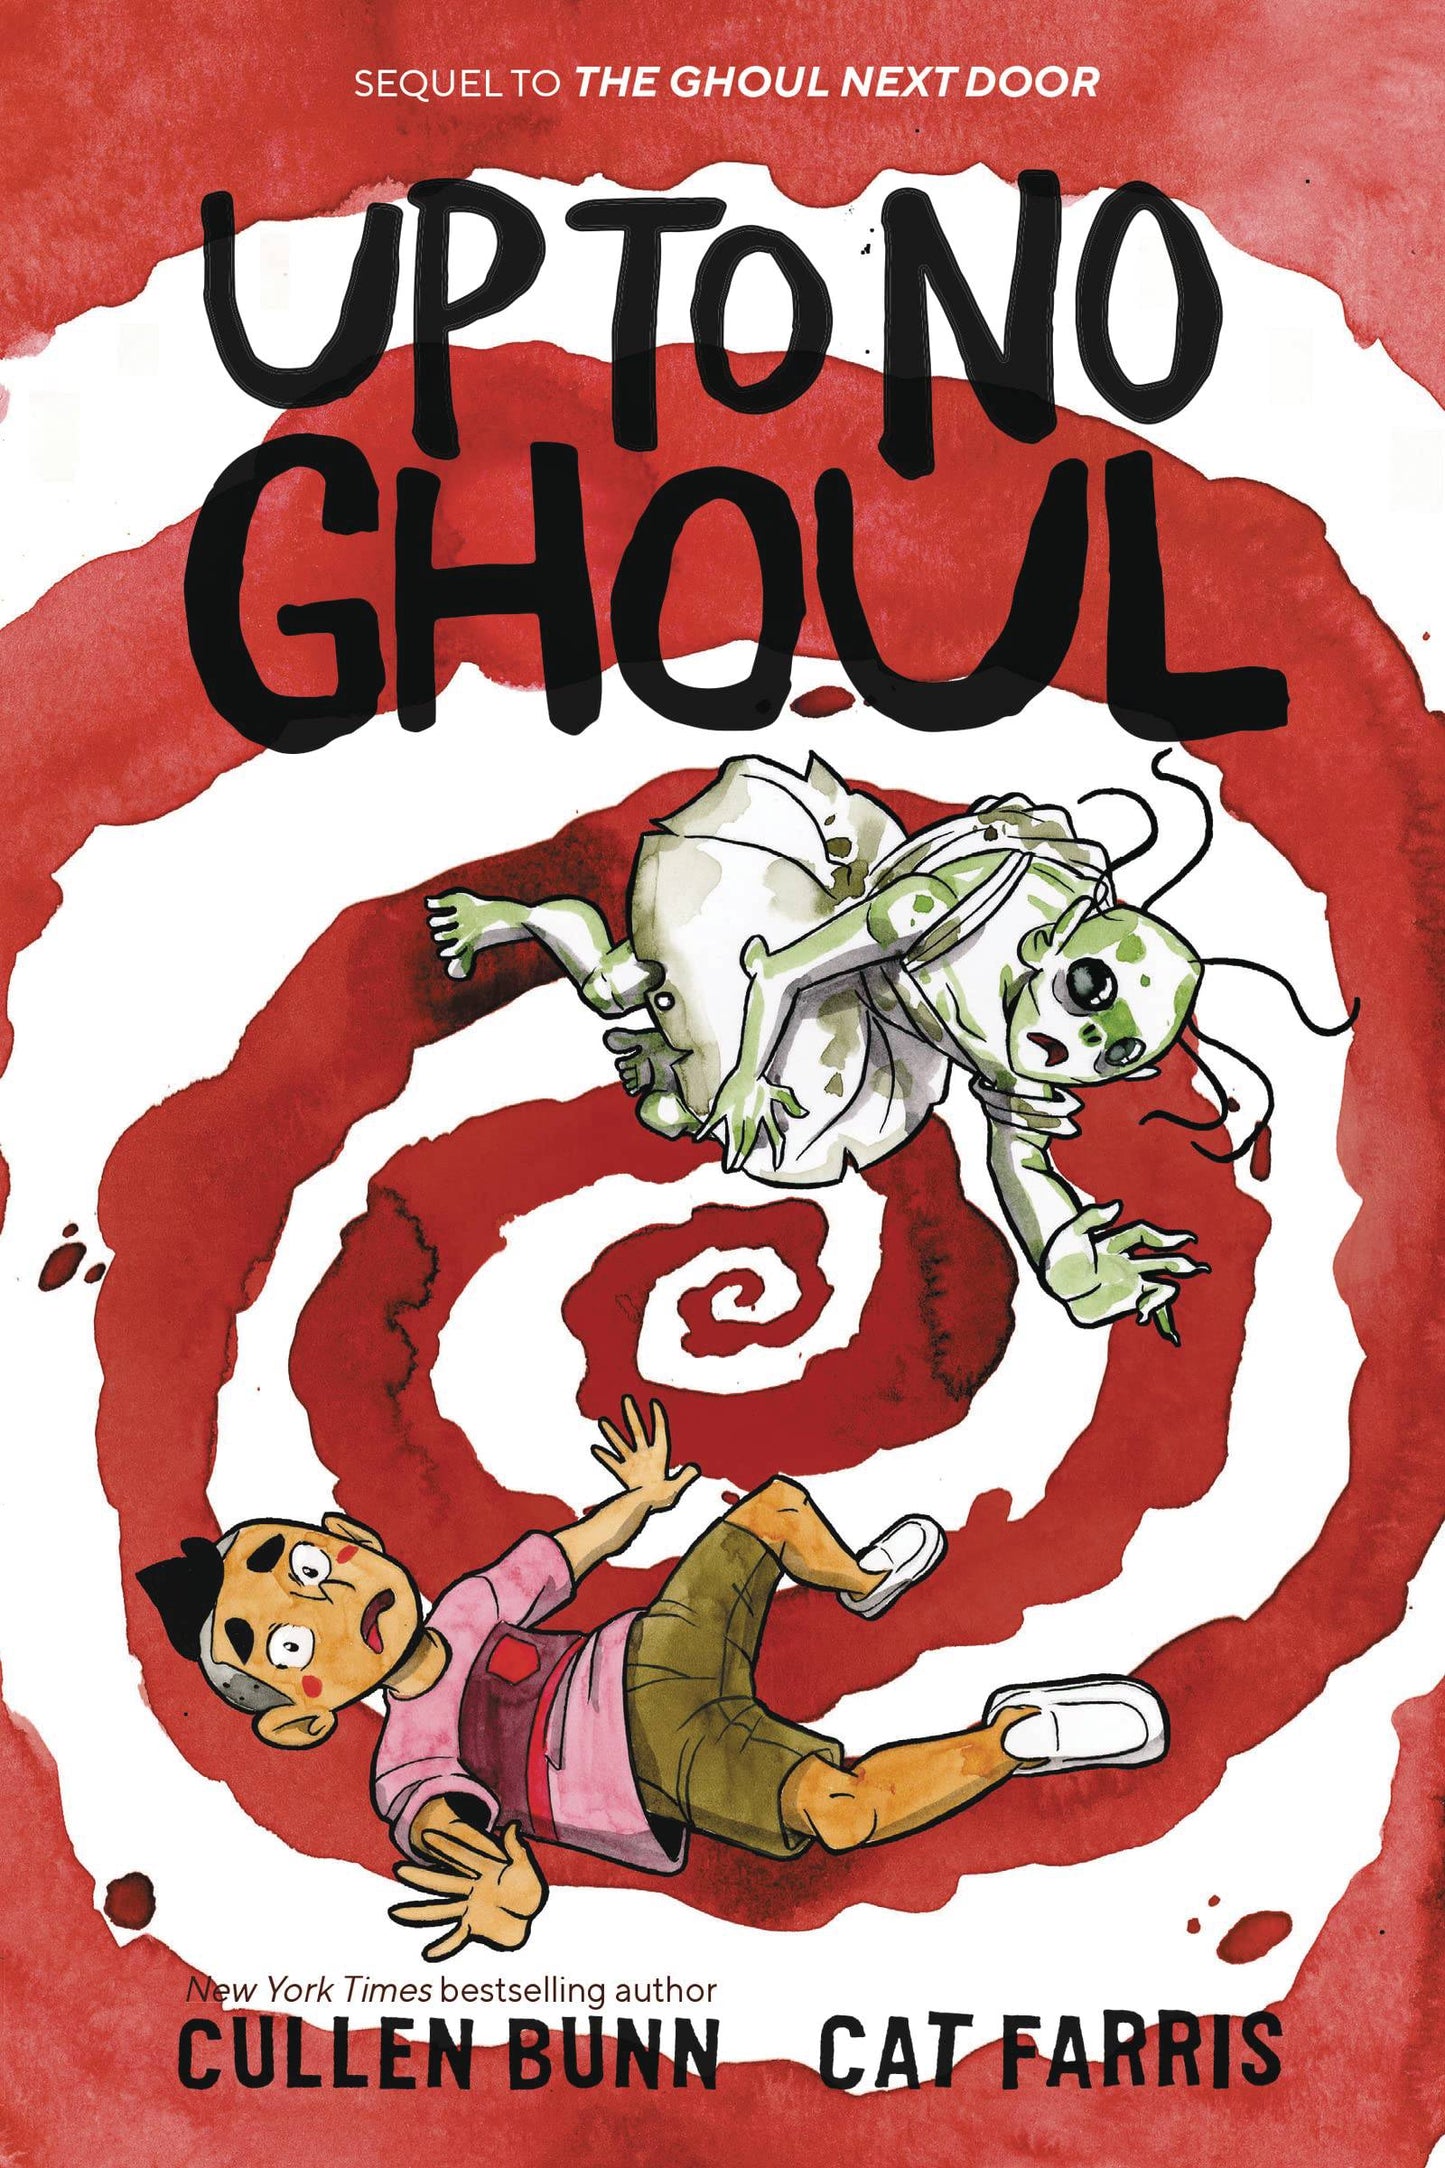 The One Stop Shop Comics & Games Up To No Ghoul Hc Gn (C: 0-1-0) (08/10/2022) HARPER ALLEY